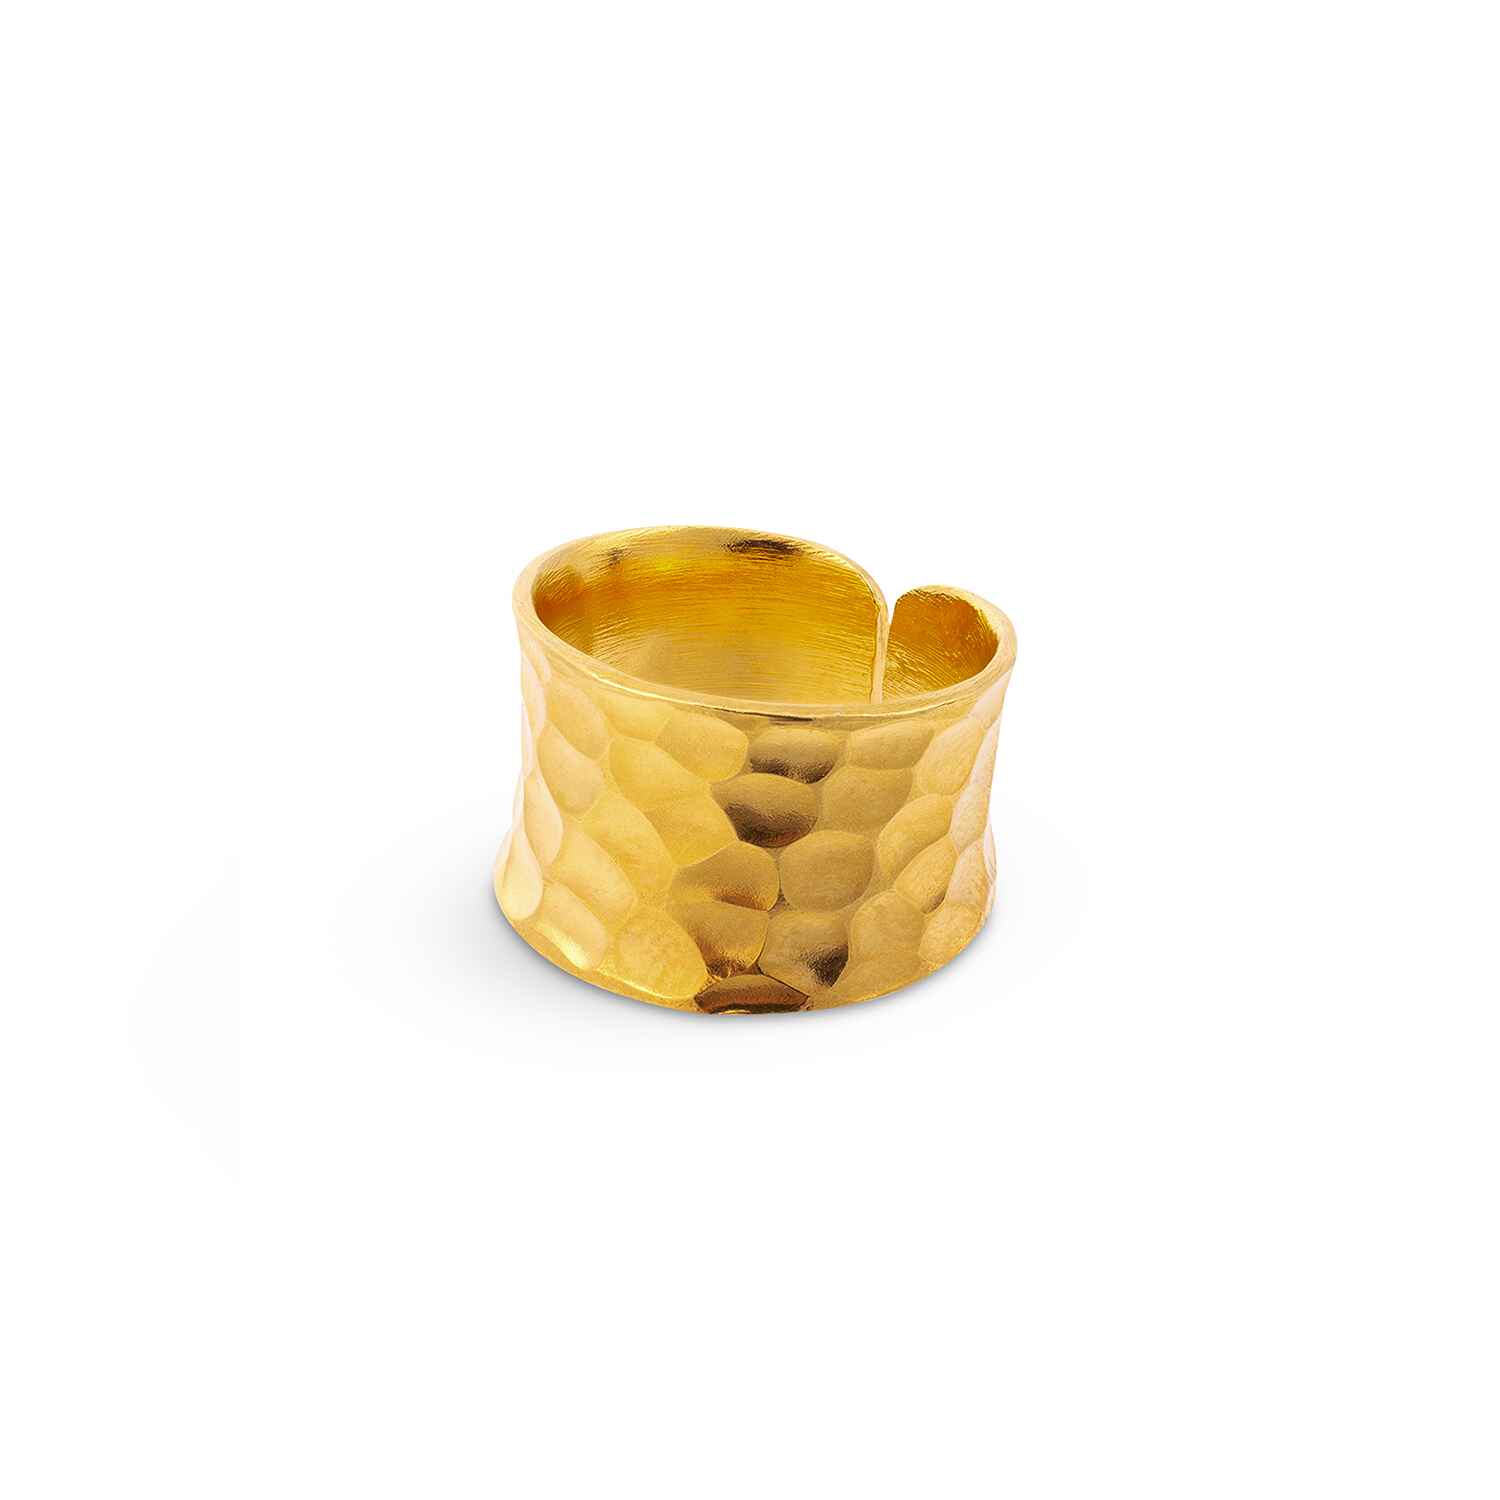 With a embossed texture that flatters and flows around the finger, the Nudo Gold Short Hammered Ring is size adjustable and handmade with sustainable 18k gold vermeil.